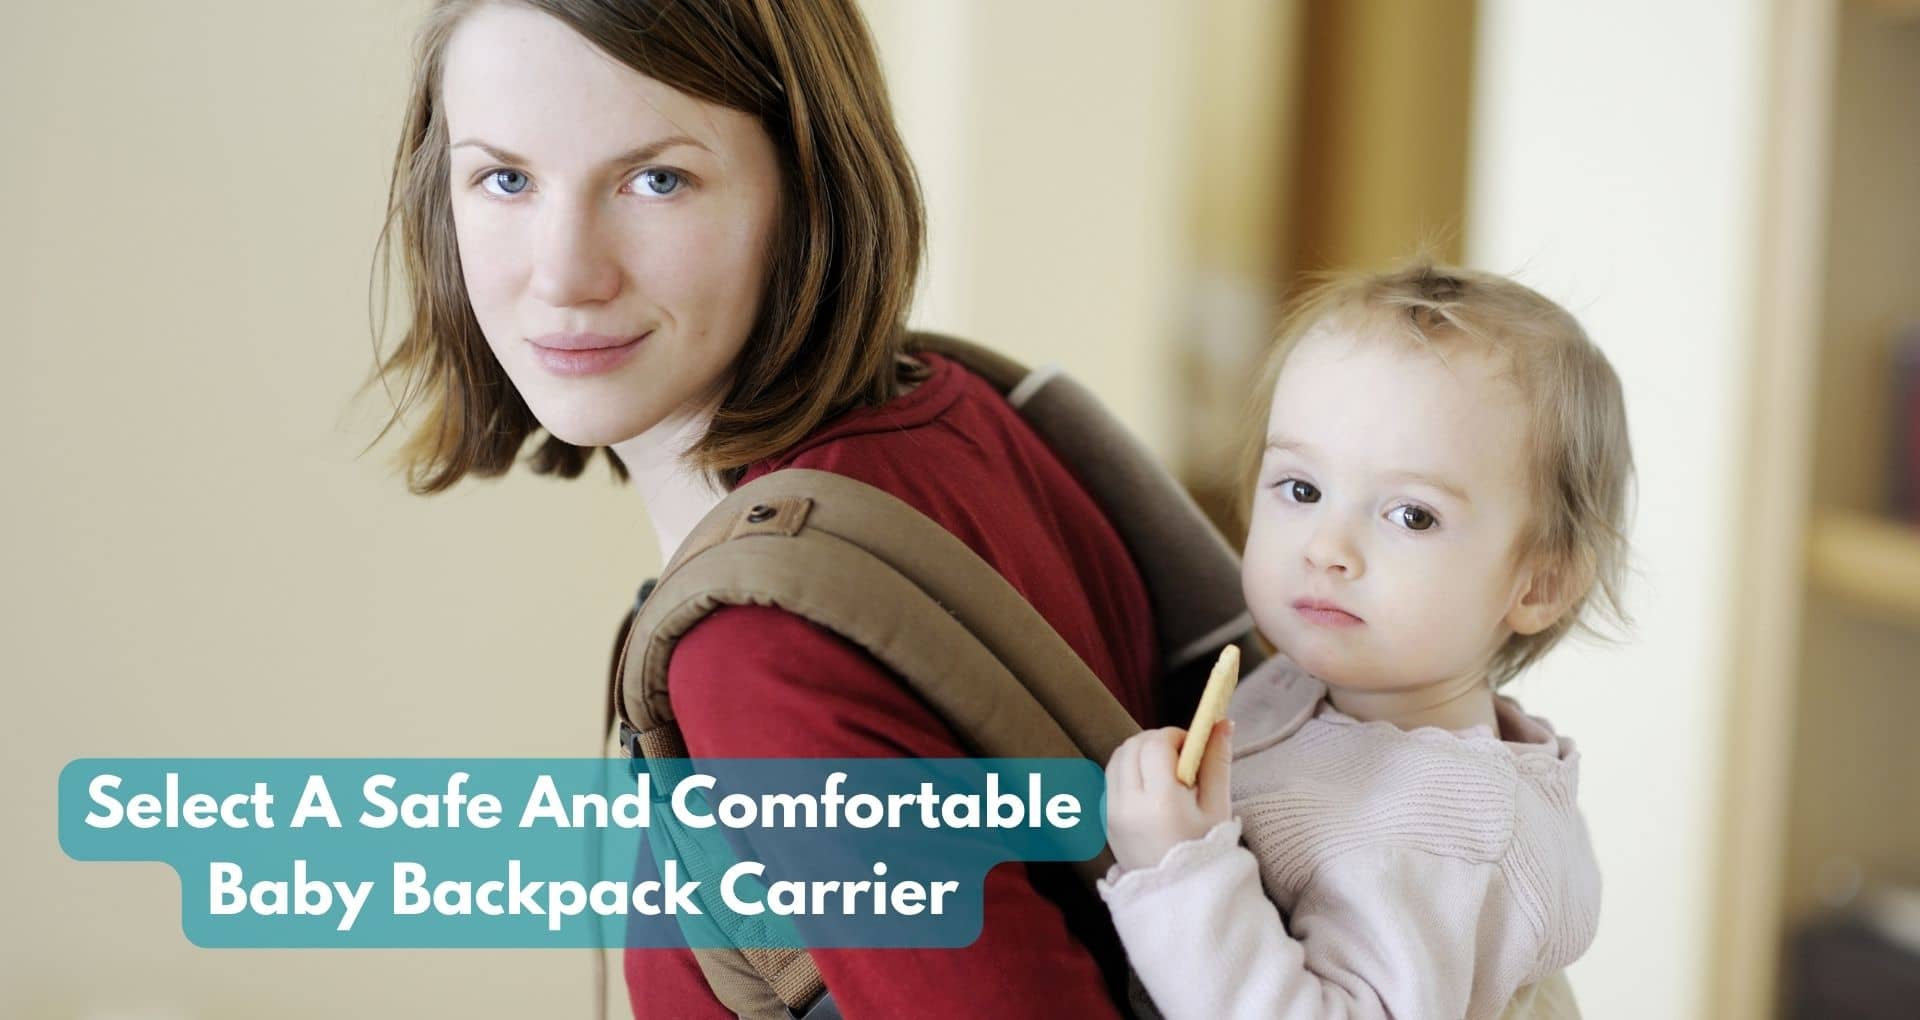 Finding The Best Baby Backpack Carrier